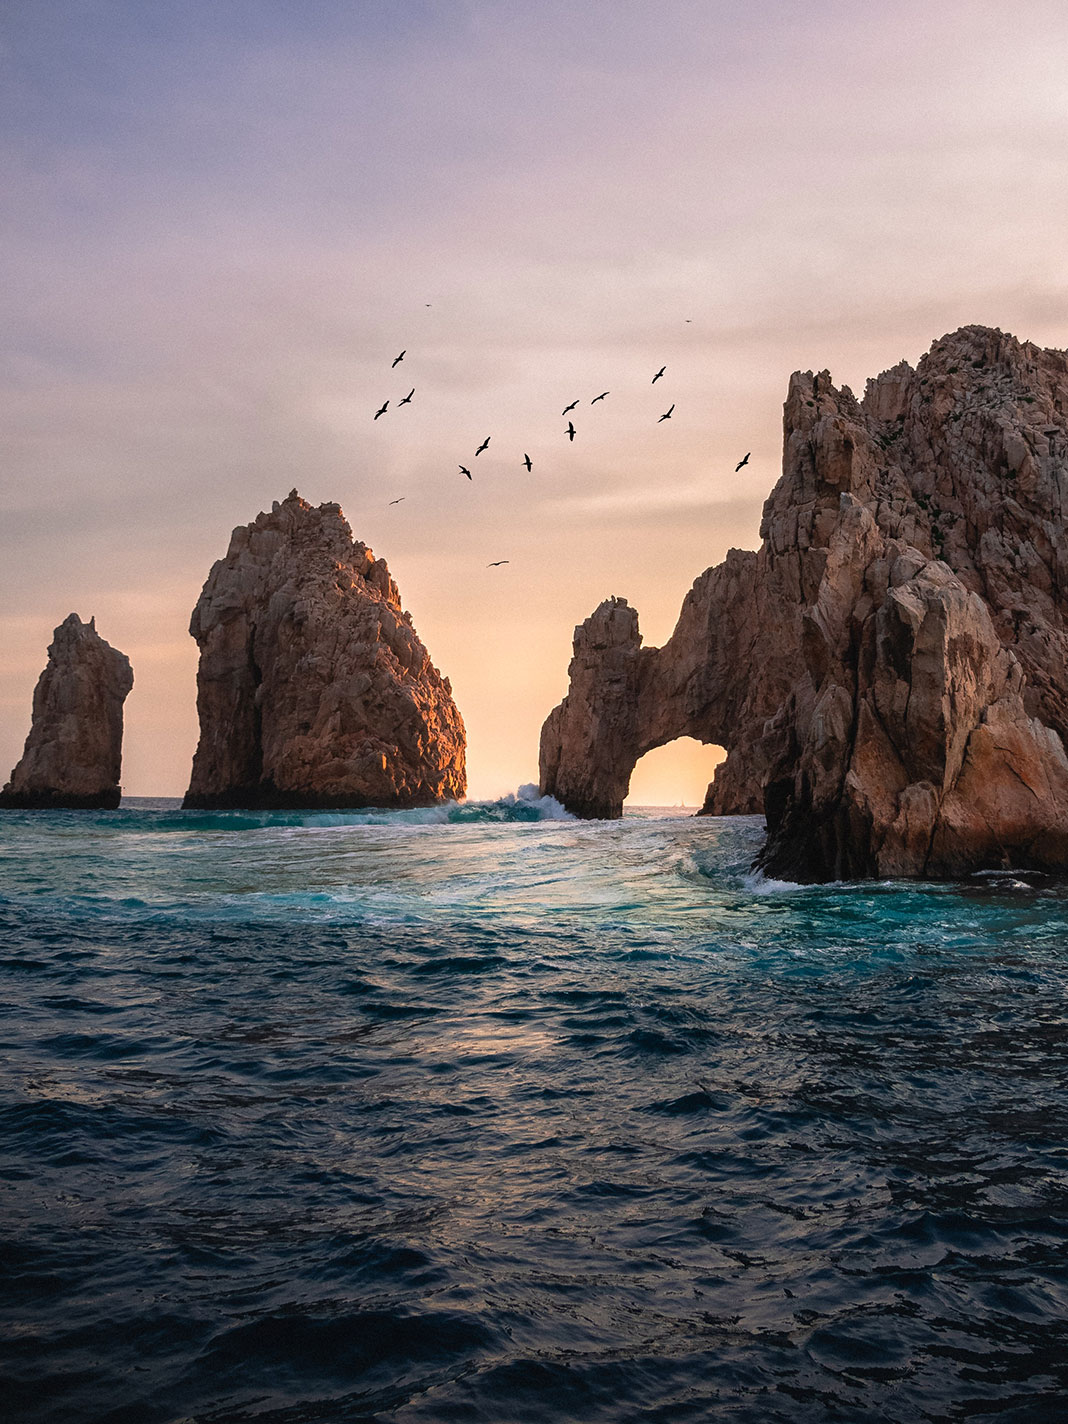 Birds wheel over the rocks and ocean at Cabo San Lucas in Baja Mexico at dusk